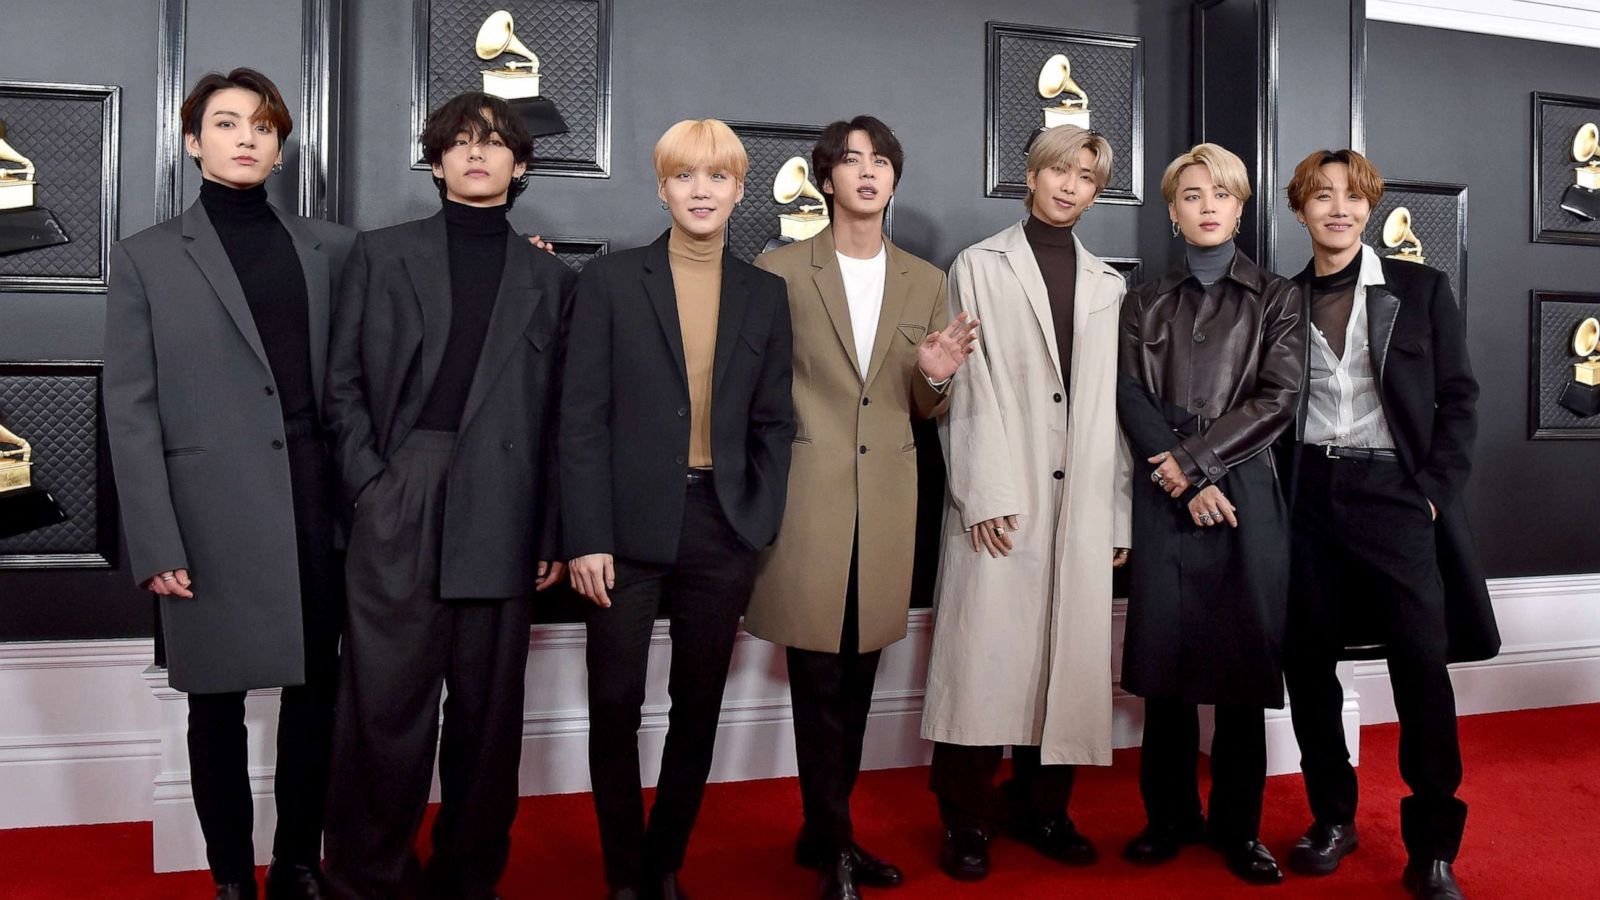 Grammys 2021: BTS loses sole nomination, set to make history with performance